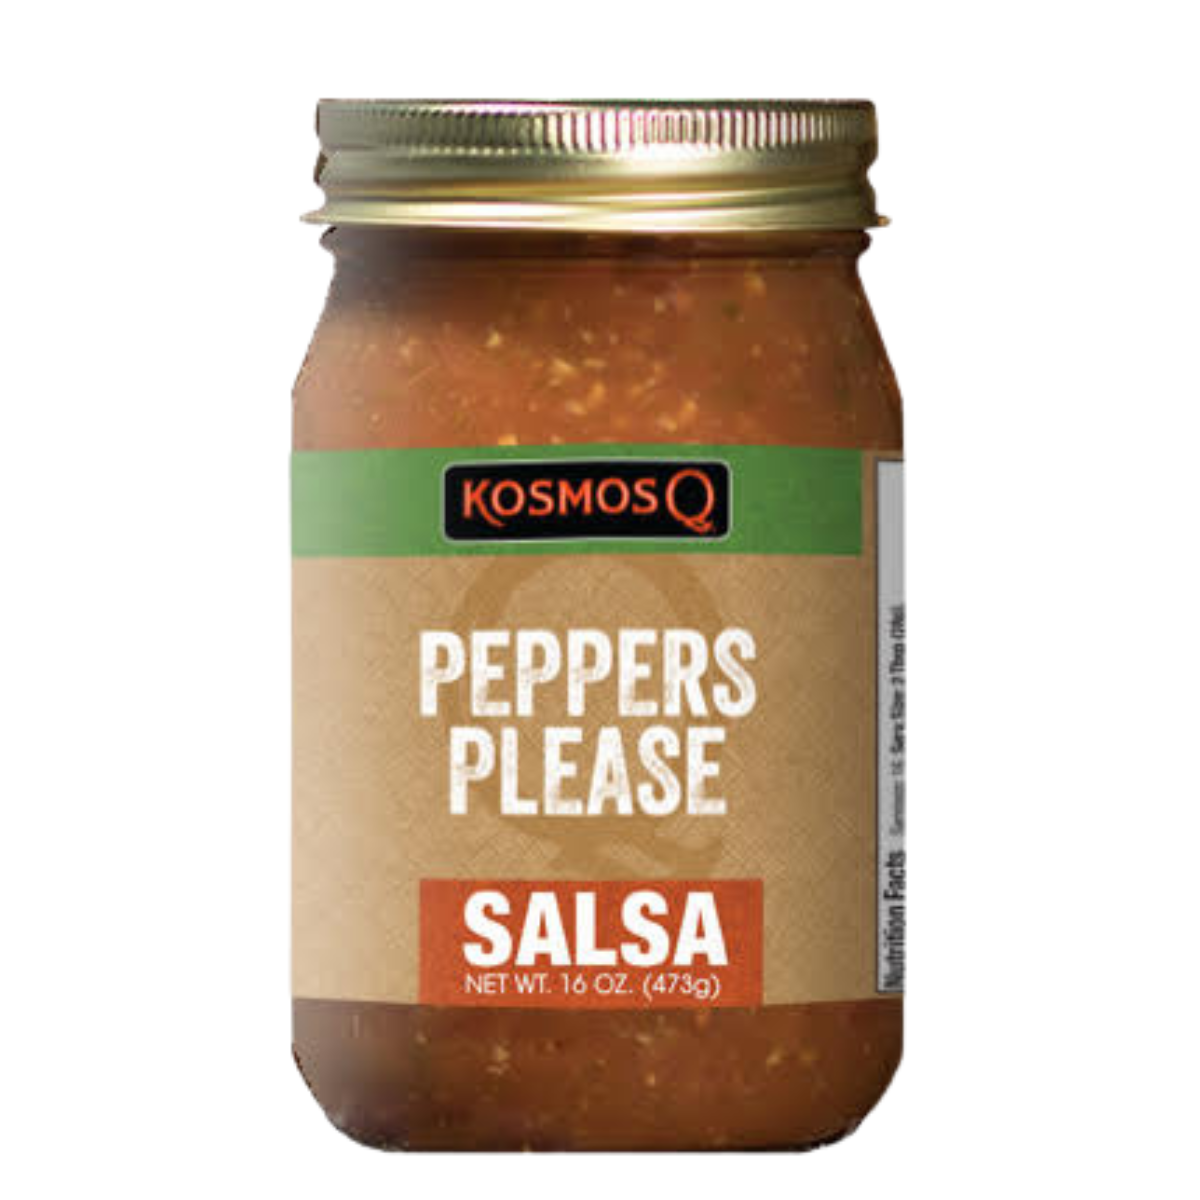 Kosmos Q BBQ Products & Supplies Peppers Please Salsa